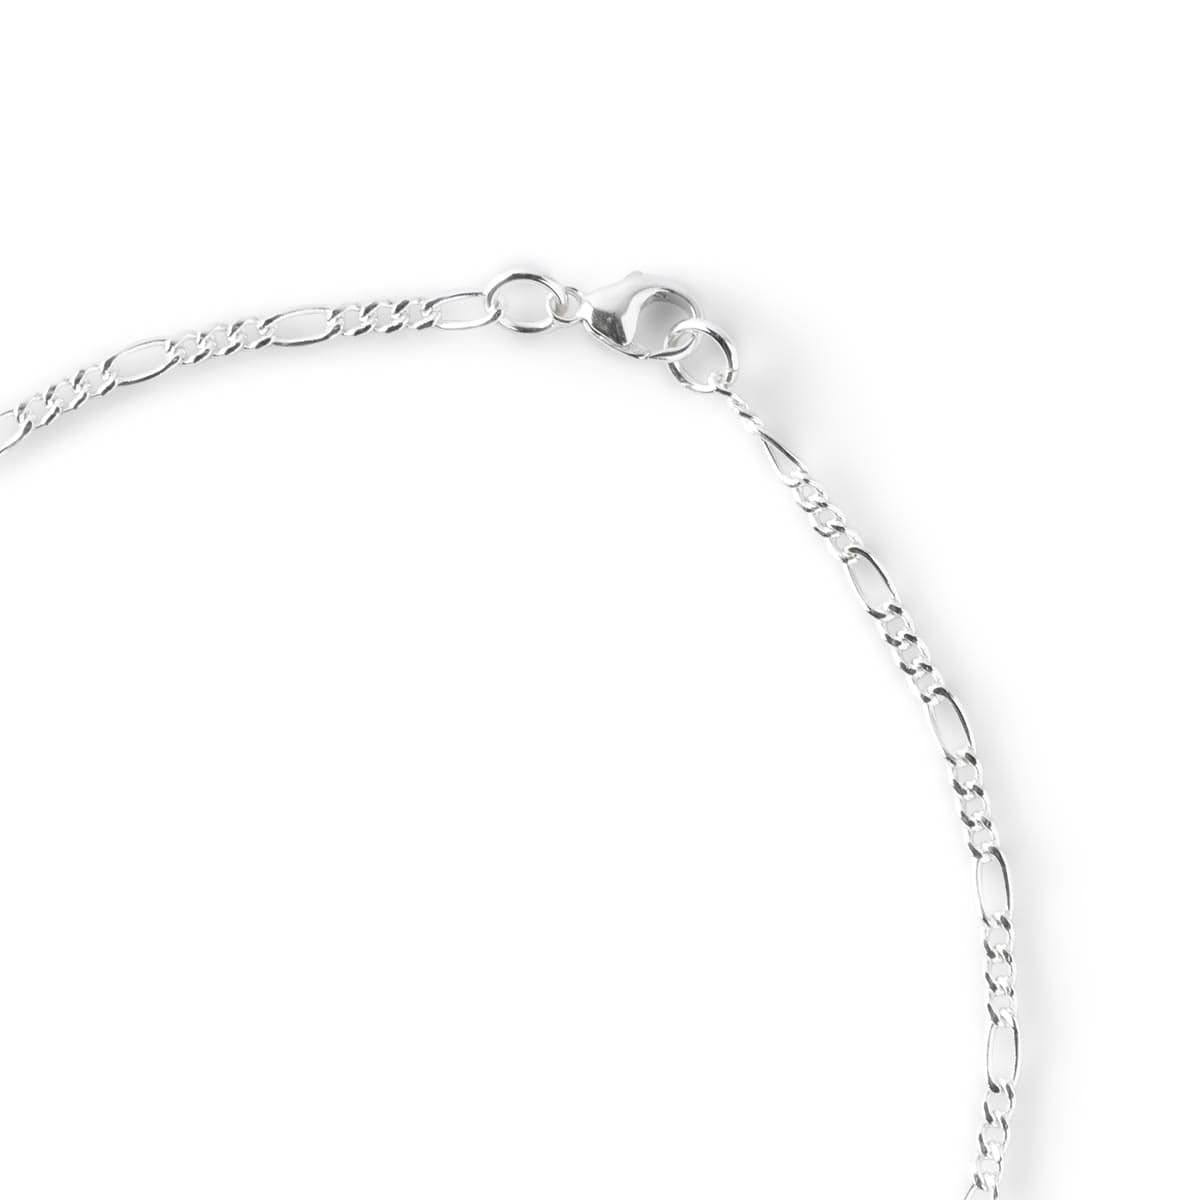 Maple Jewelry SILVER 925 / 60CM FREAKY TAILS CHAIN